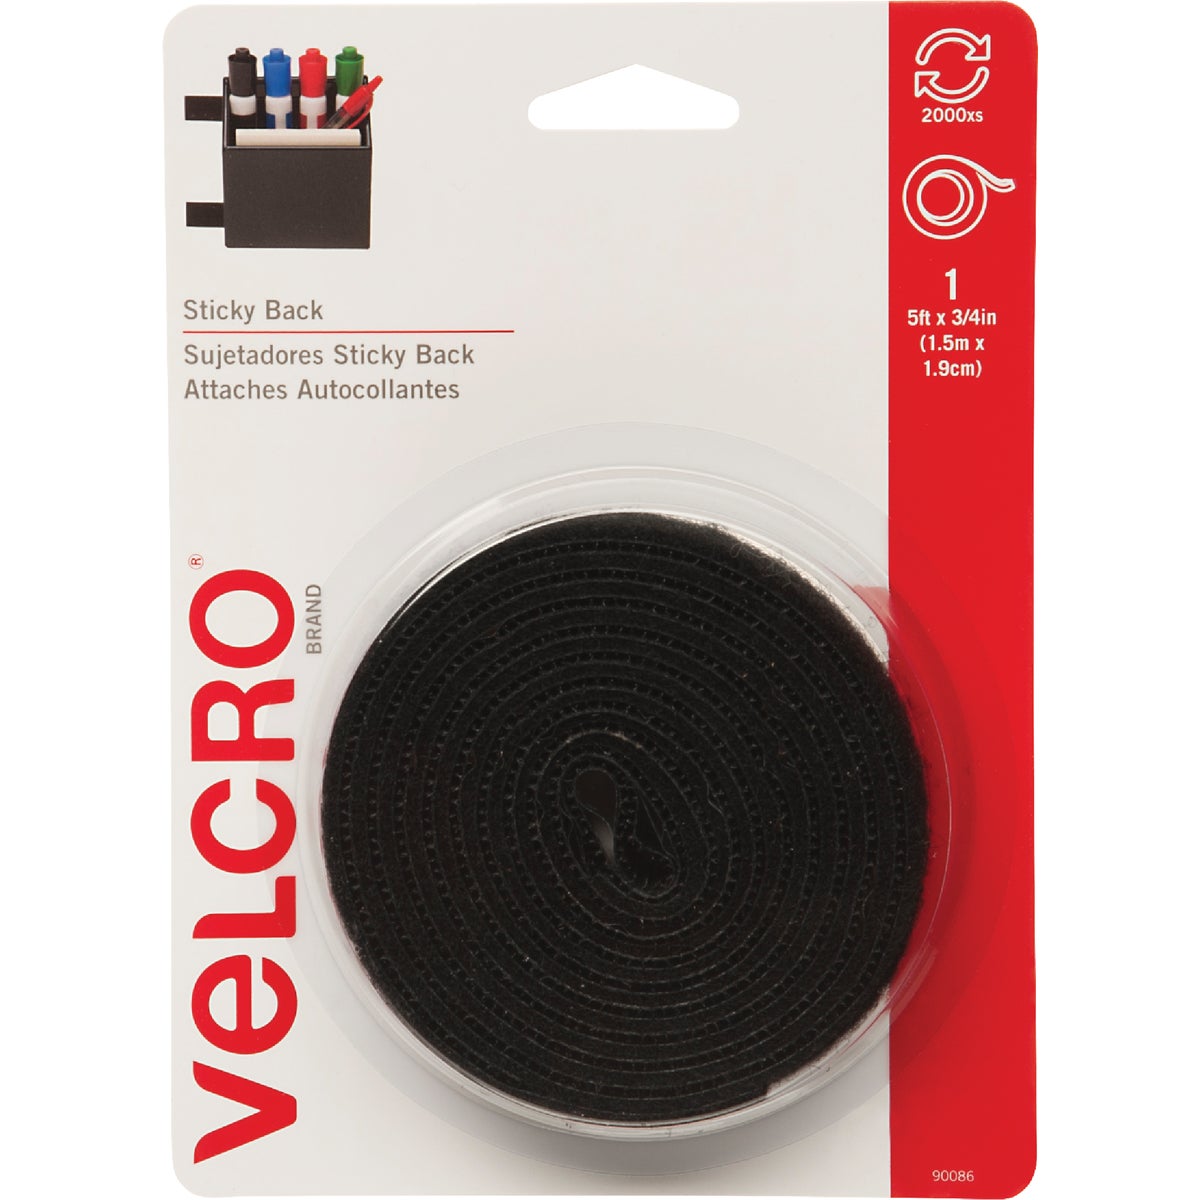 VELCRO Brand 3/4 In. x 5 Ft. Black Sticky Back Reclosable Hook & Loop Roll